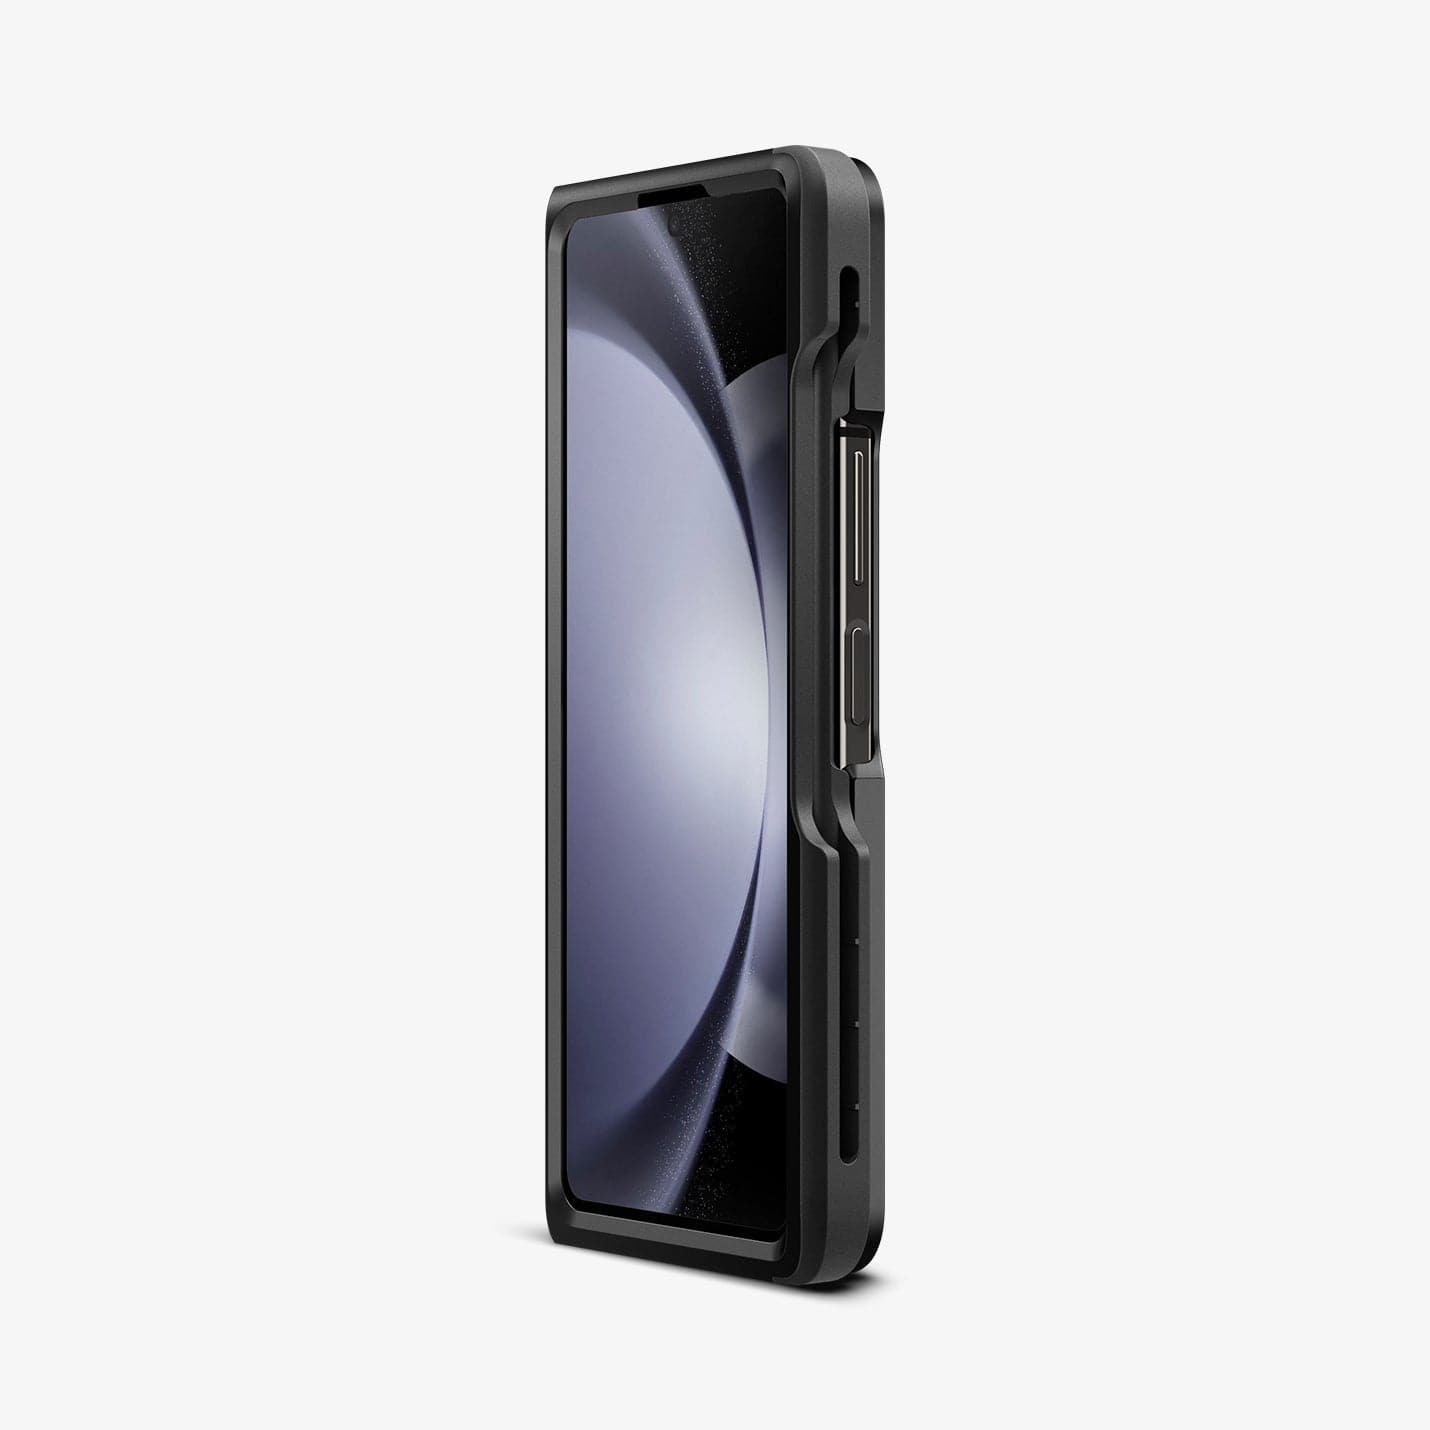 New Samsung Galaxy Z Fold5 Phone: View Specs, Prices & Colors